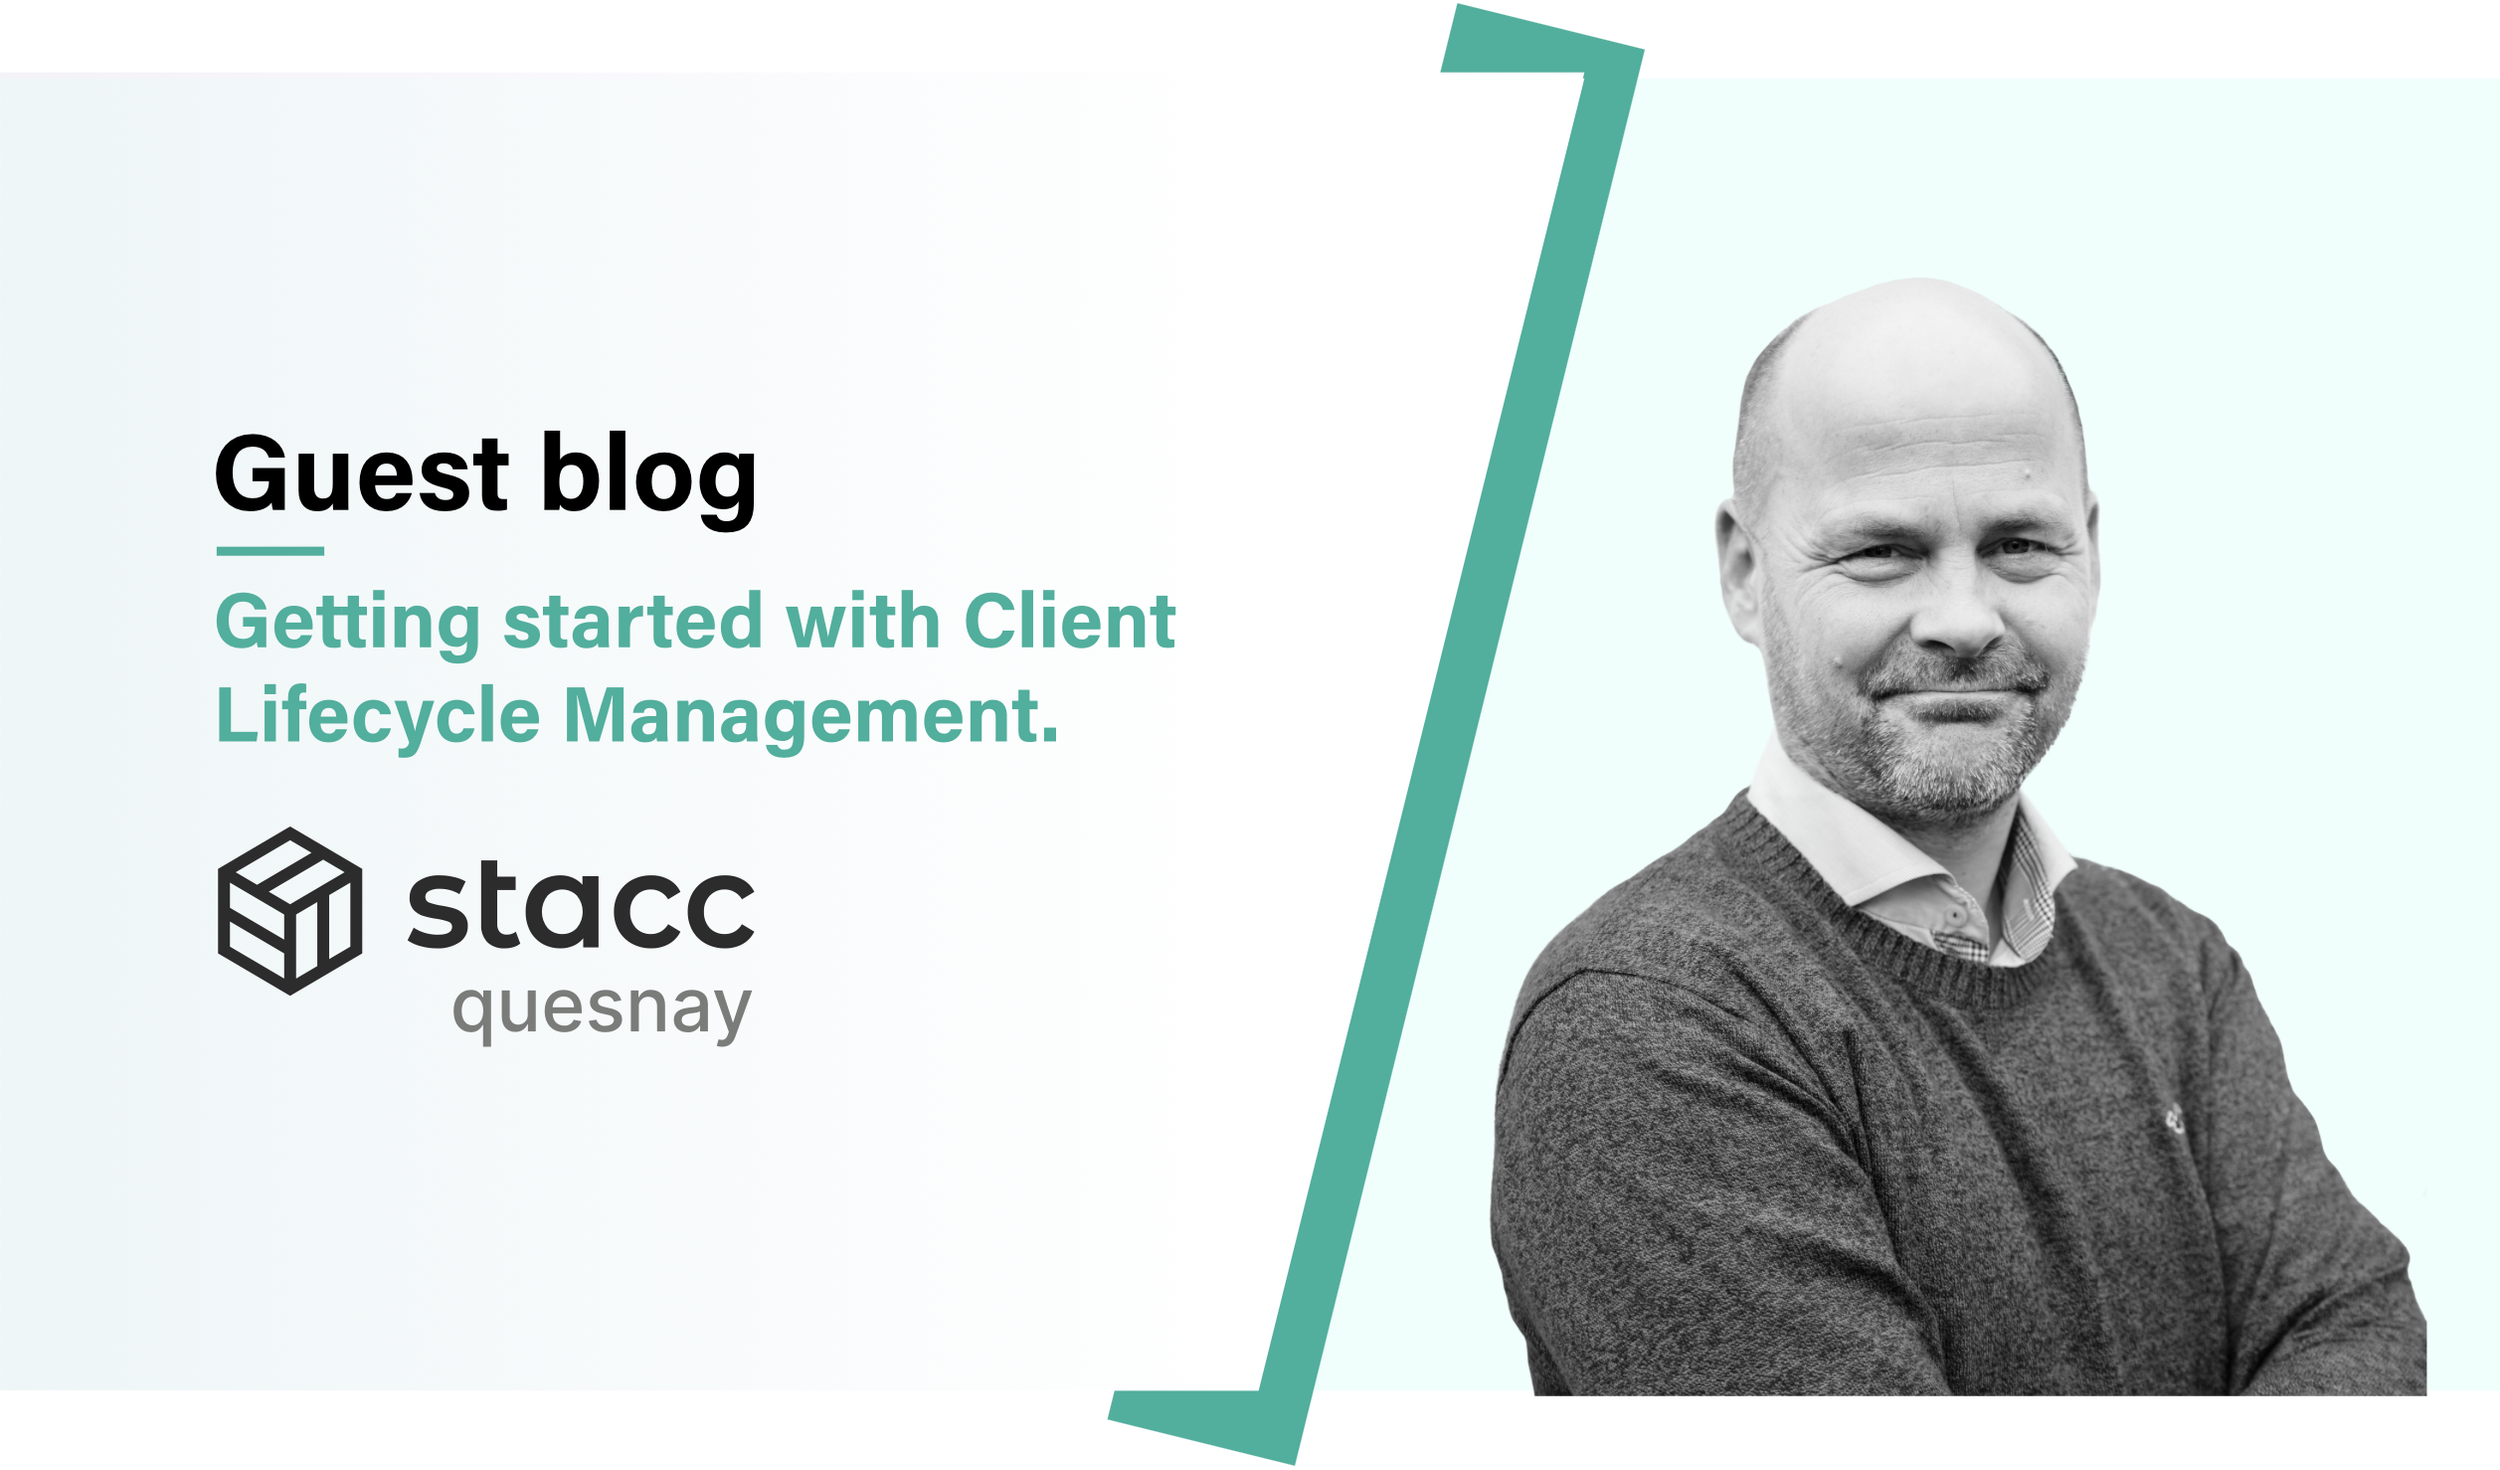 Guest blog: Getting started with Client Lifecycle Management